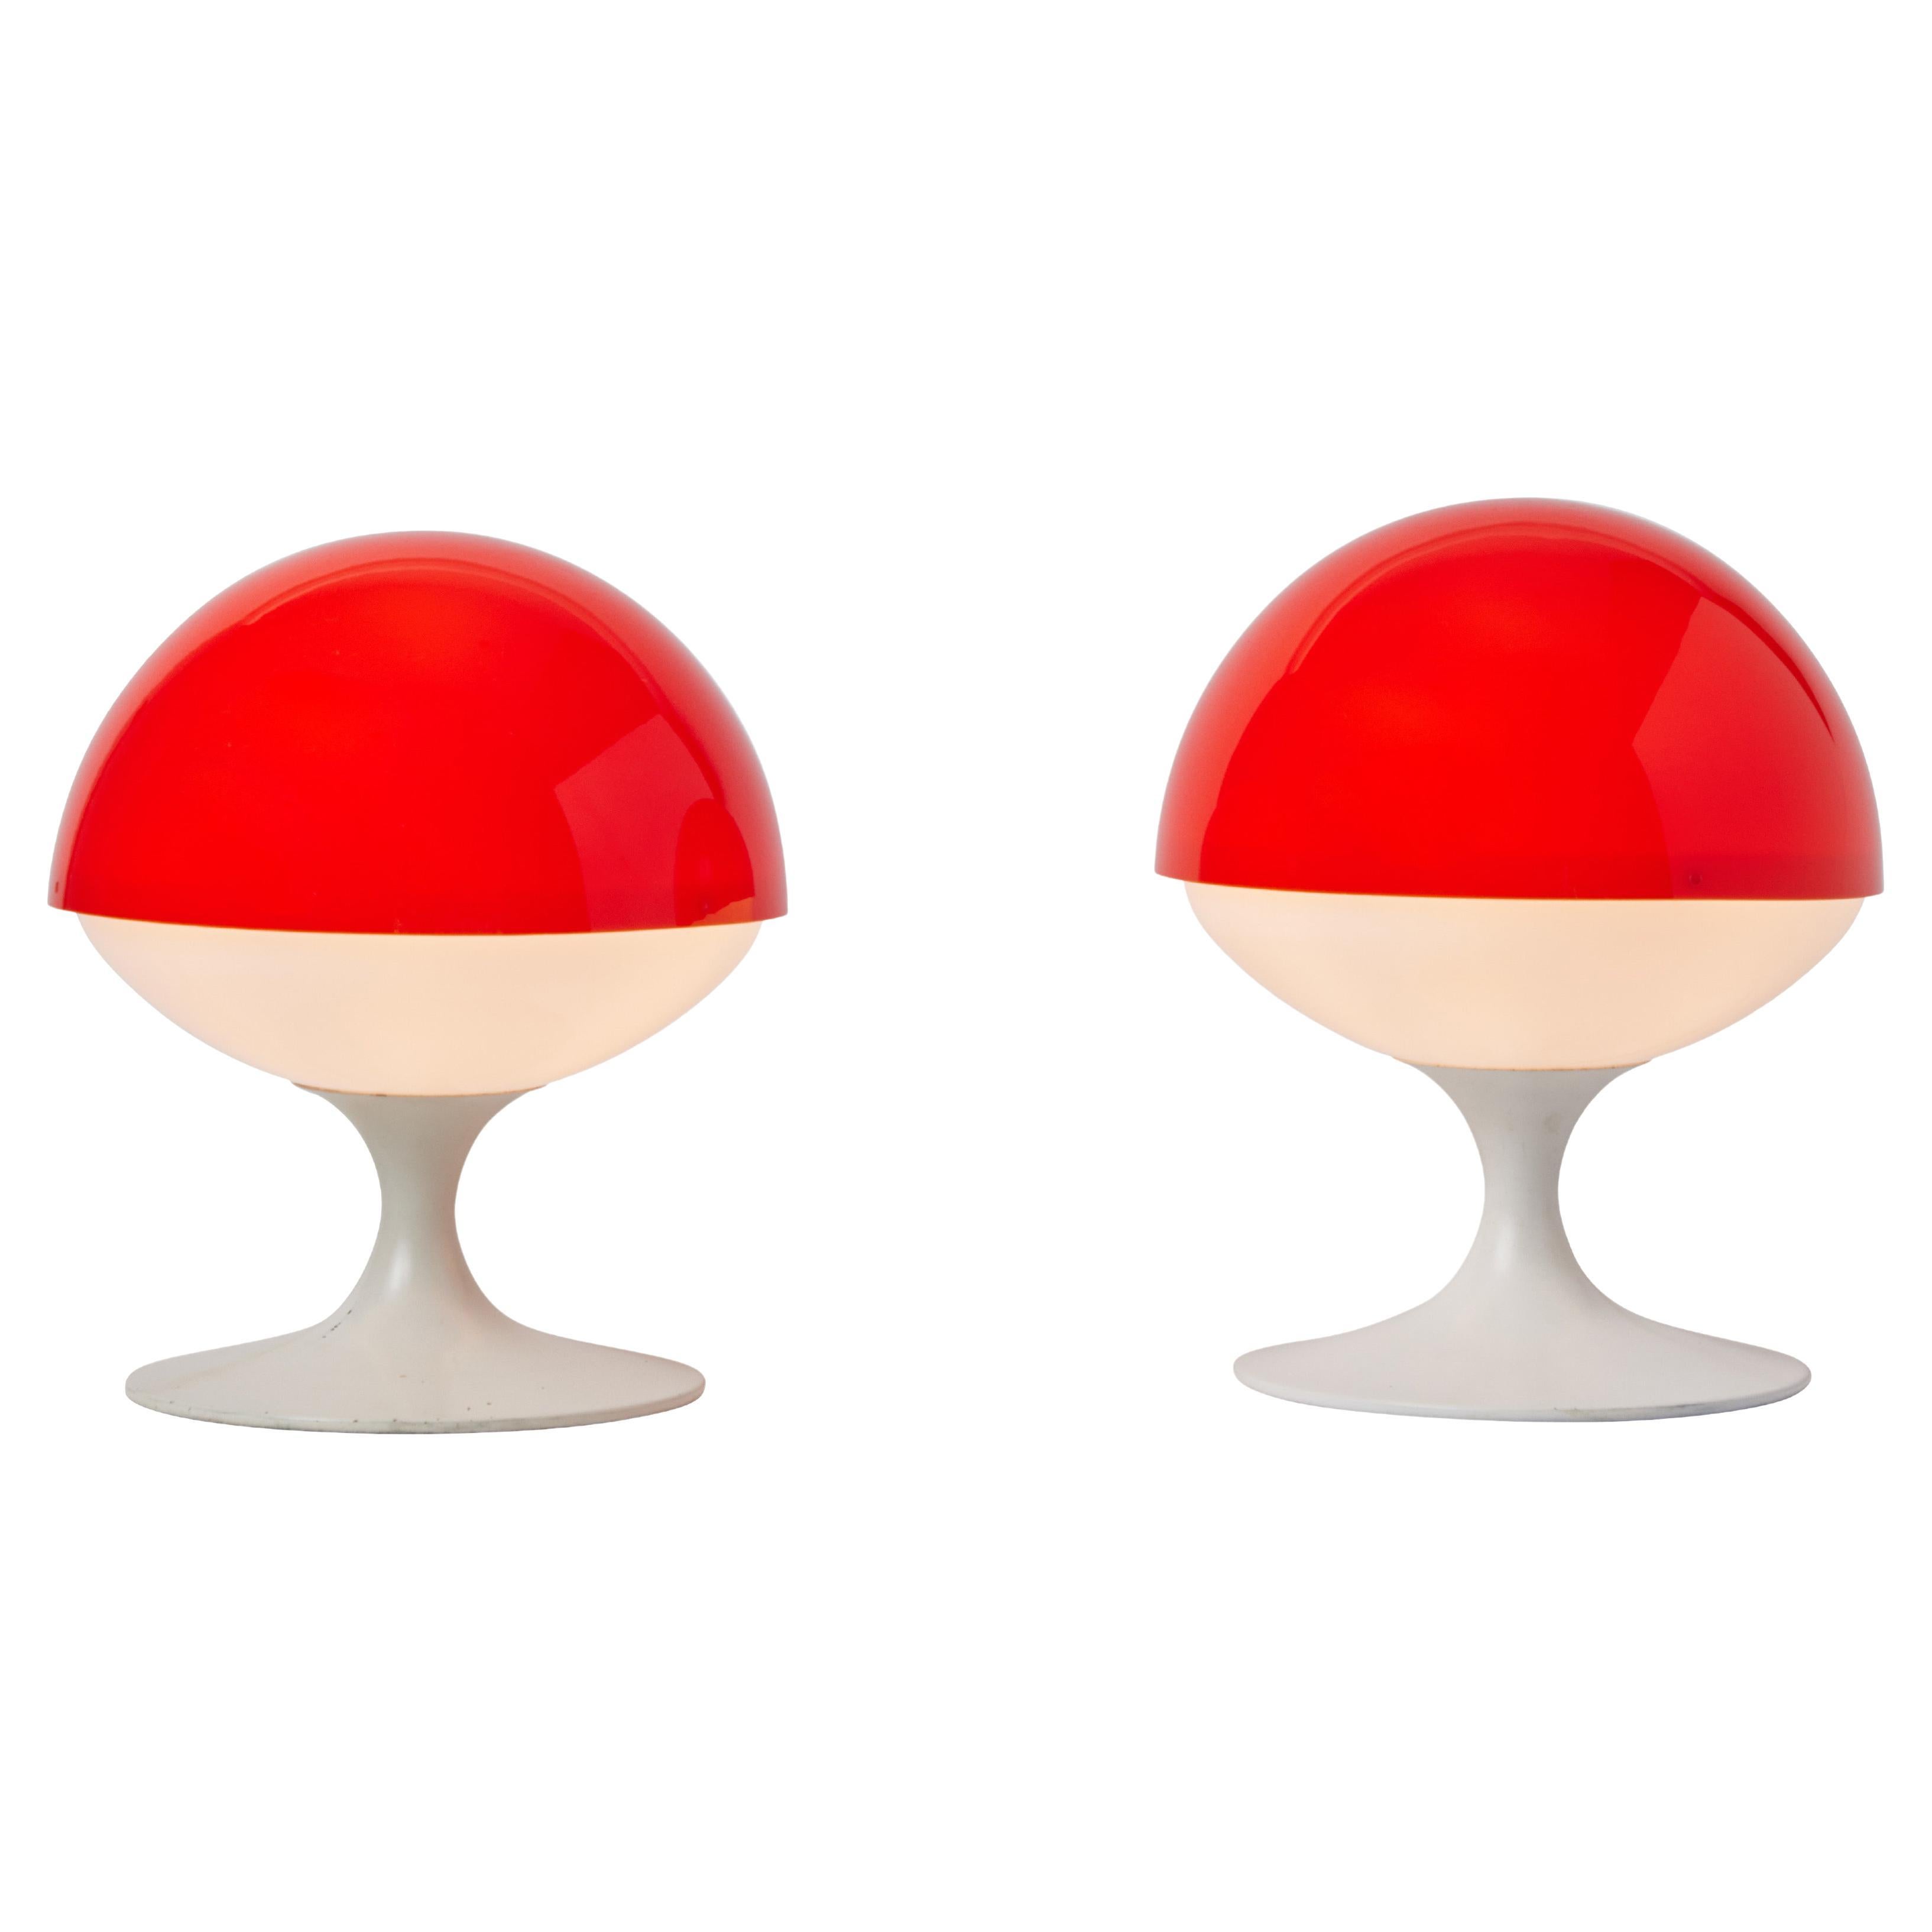 Pair of 1960s Max Bill Red & White Table Lamps for Temde Leuchten, Switzerland For Sale